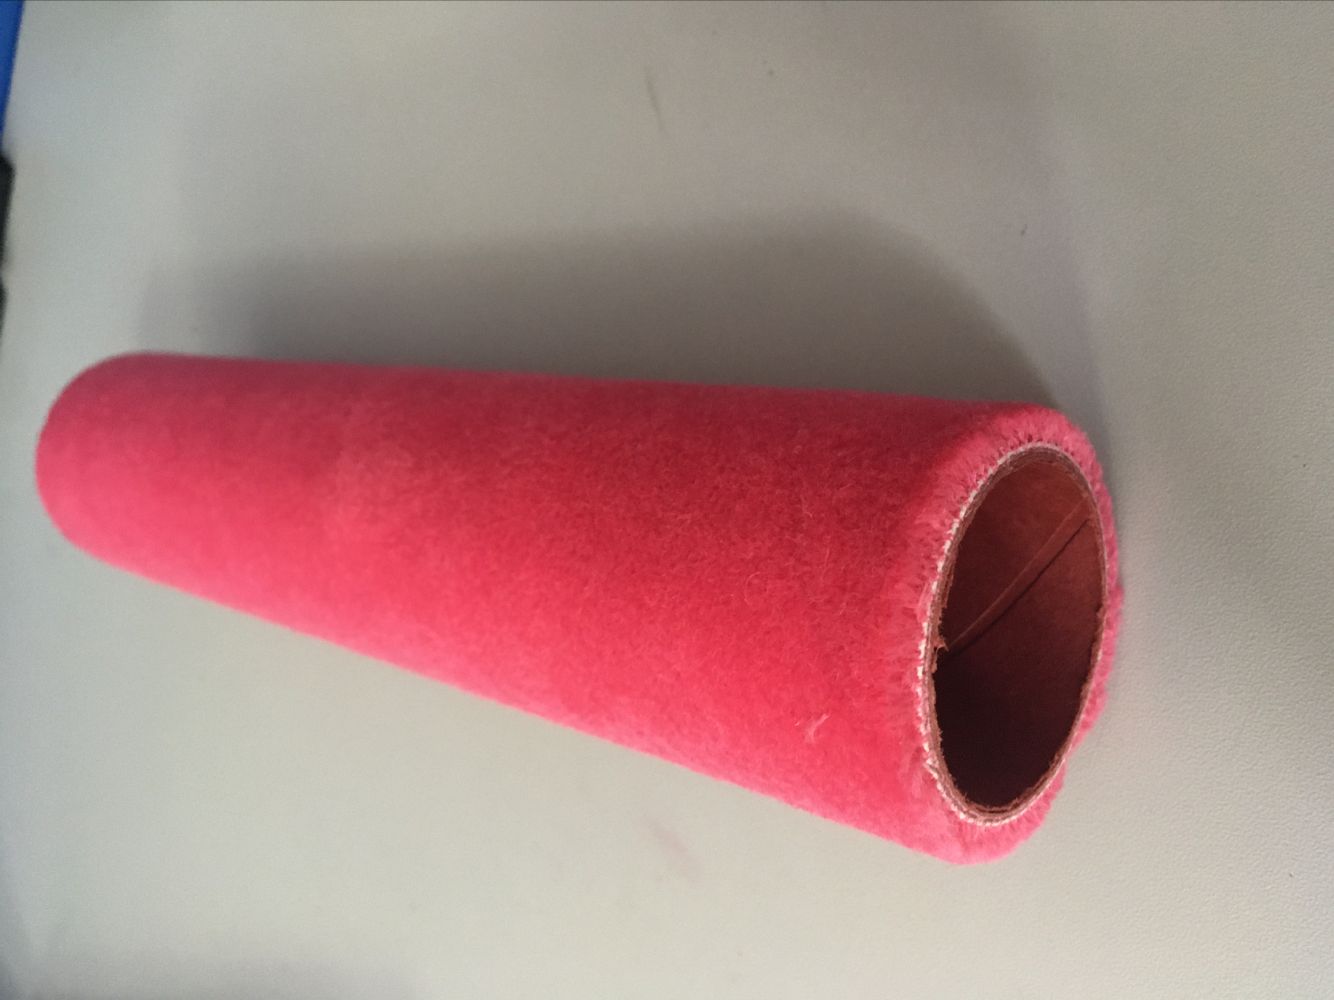 Super fine Rollers, Red wool with short pile for very smooth surface